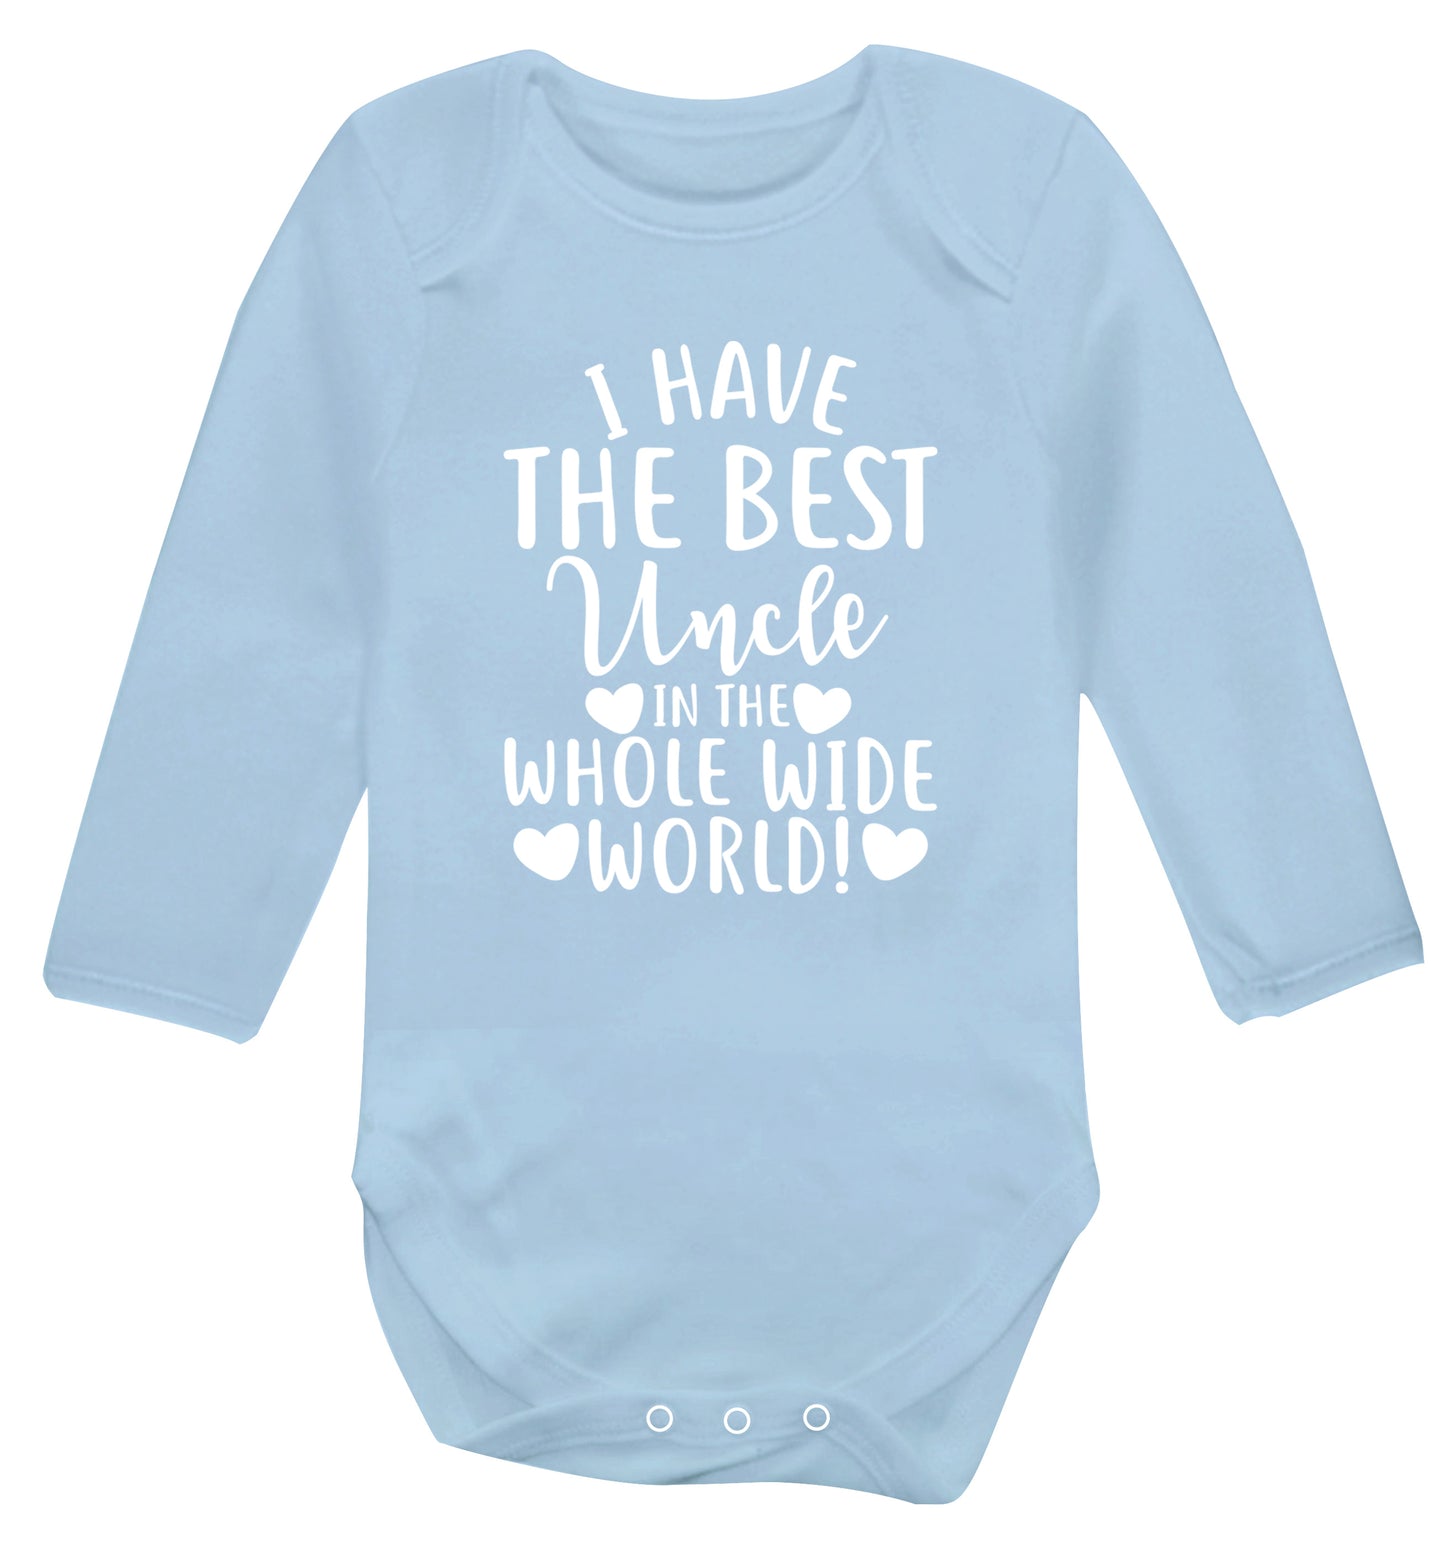 I have the best uncle in the whole wide world! Baby Vest long sleeved pale blue 6-12 months